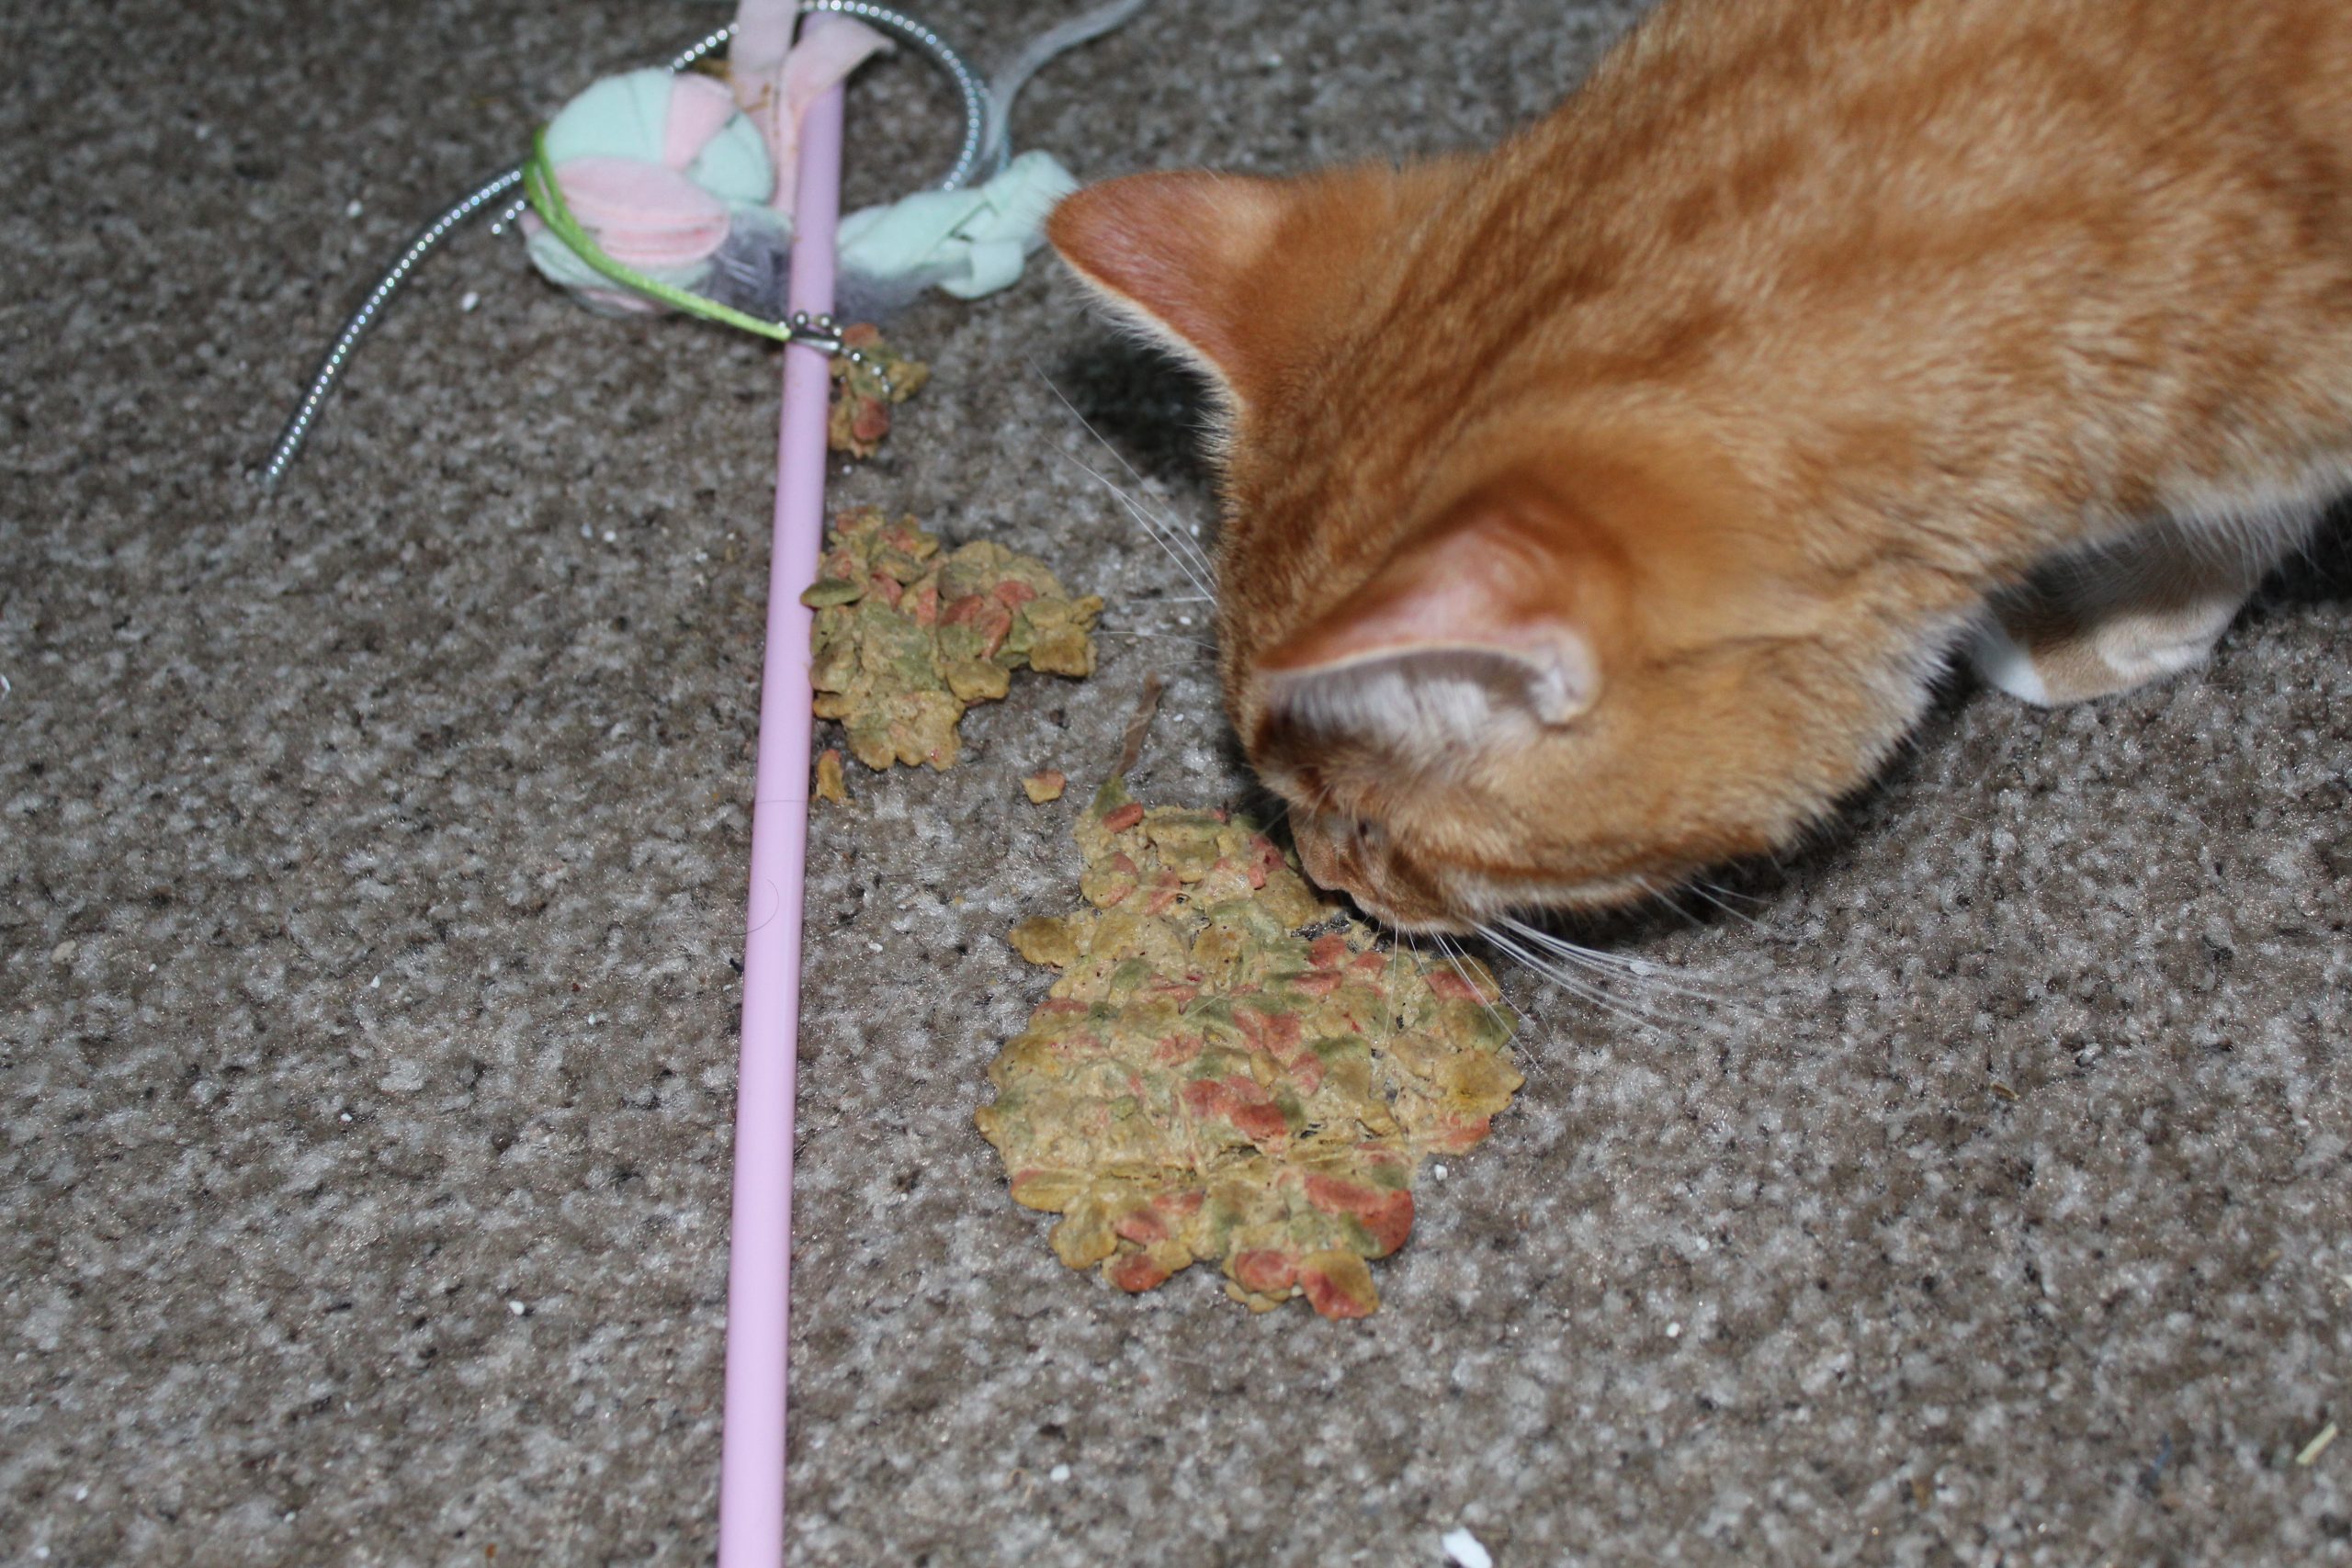 an orange cat is depicted sniffing a pile of cat vomit which is chunky and there is a wand cat toy to the left of the vomit on the ground